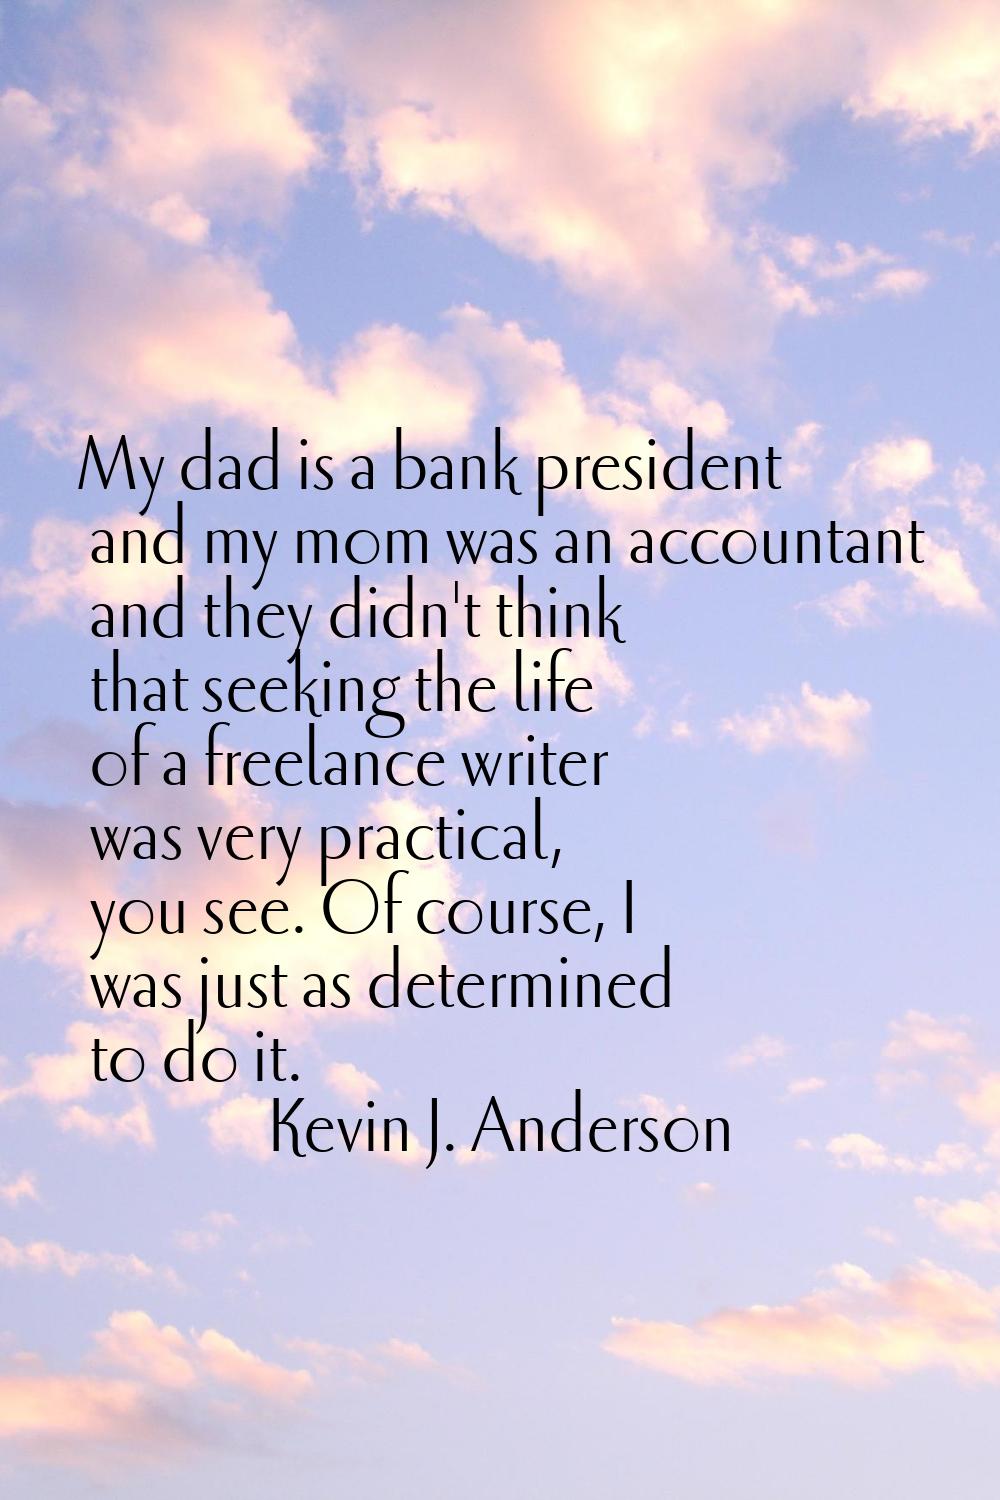 My dad is a bank president and my mom was an accountant and they didn't think that seeking the life